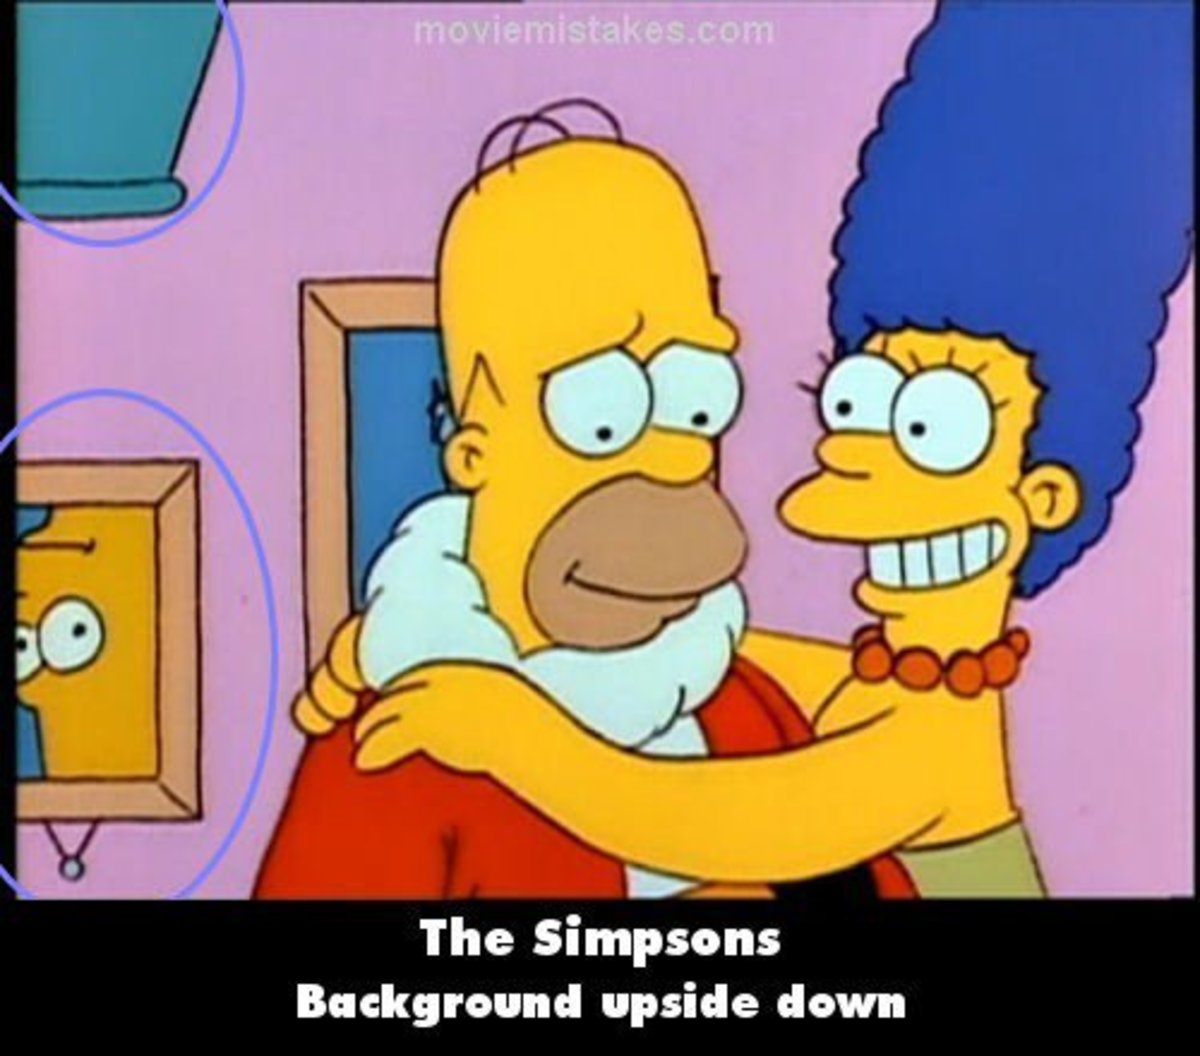 Quality control for Season 1 of The Simpsons wasn't the best.